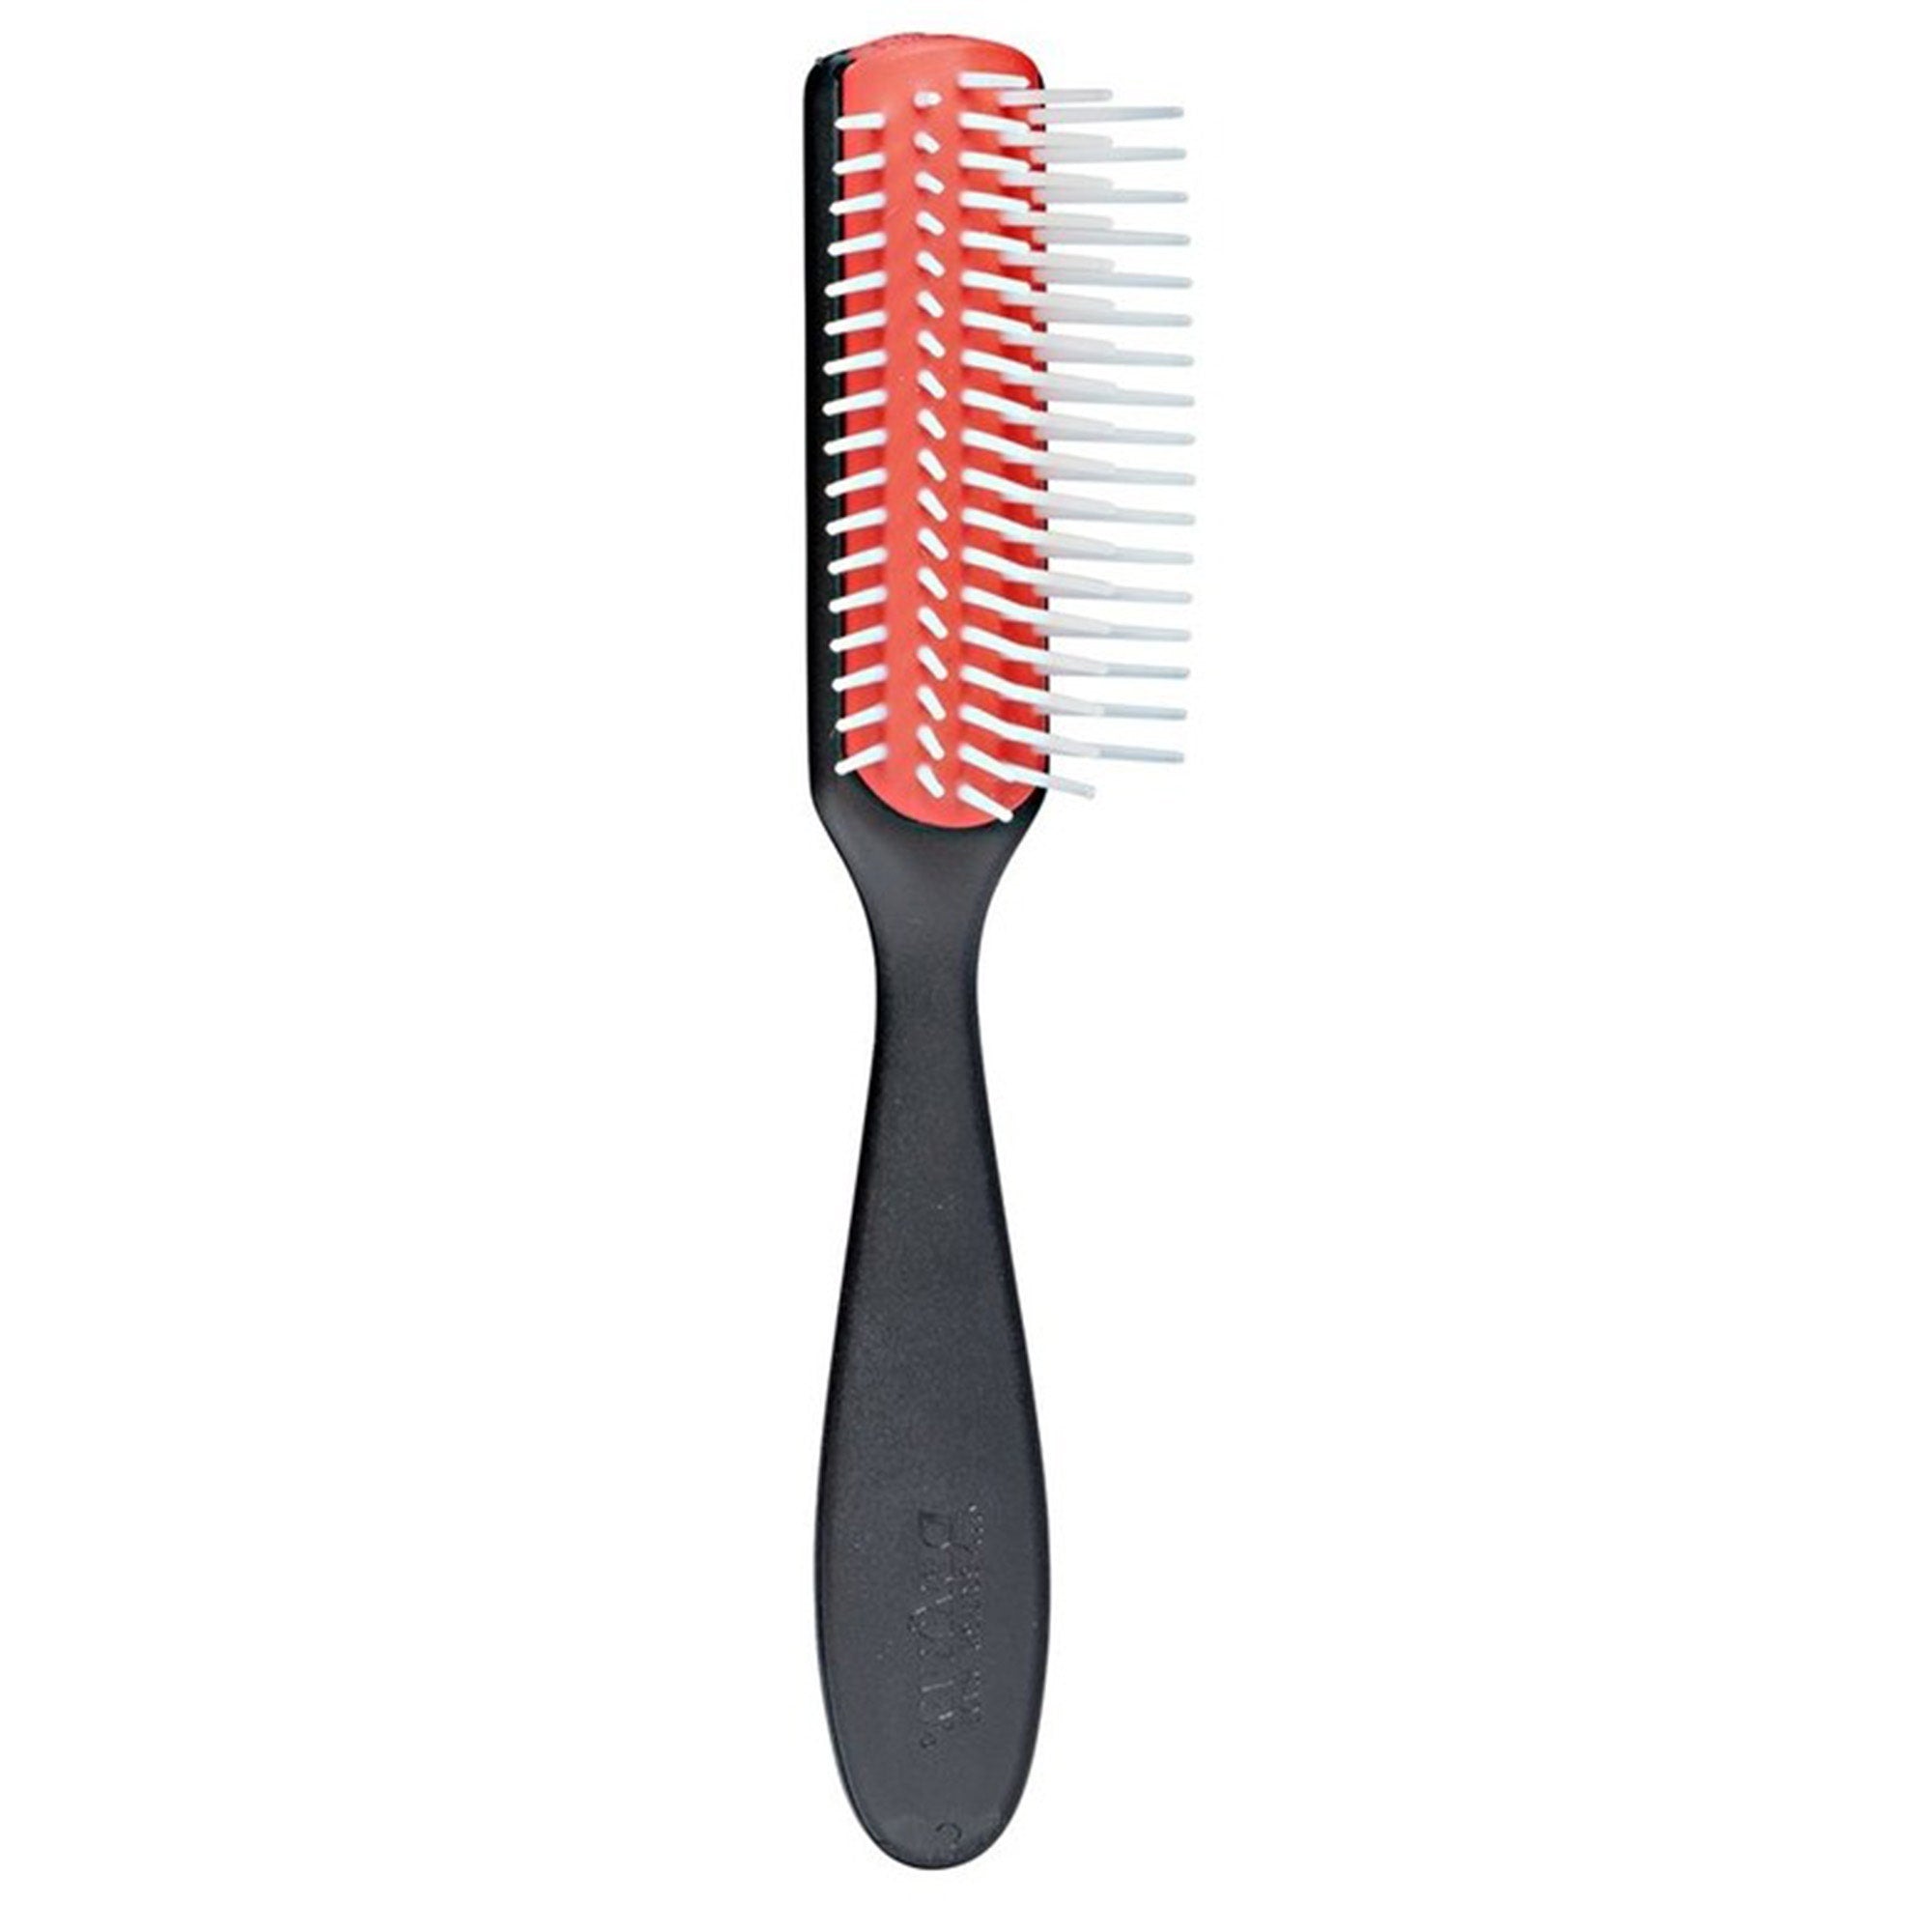 A detangling hair comb and brush used in hairdressing